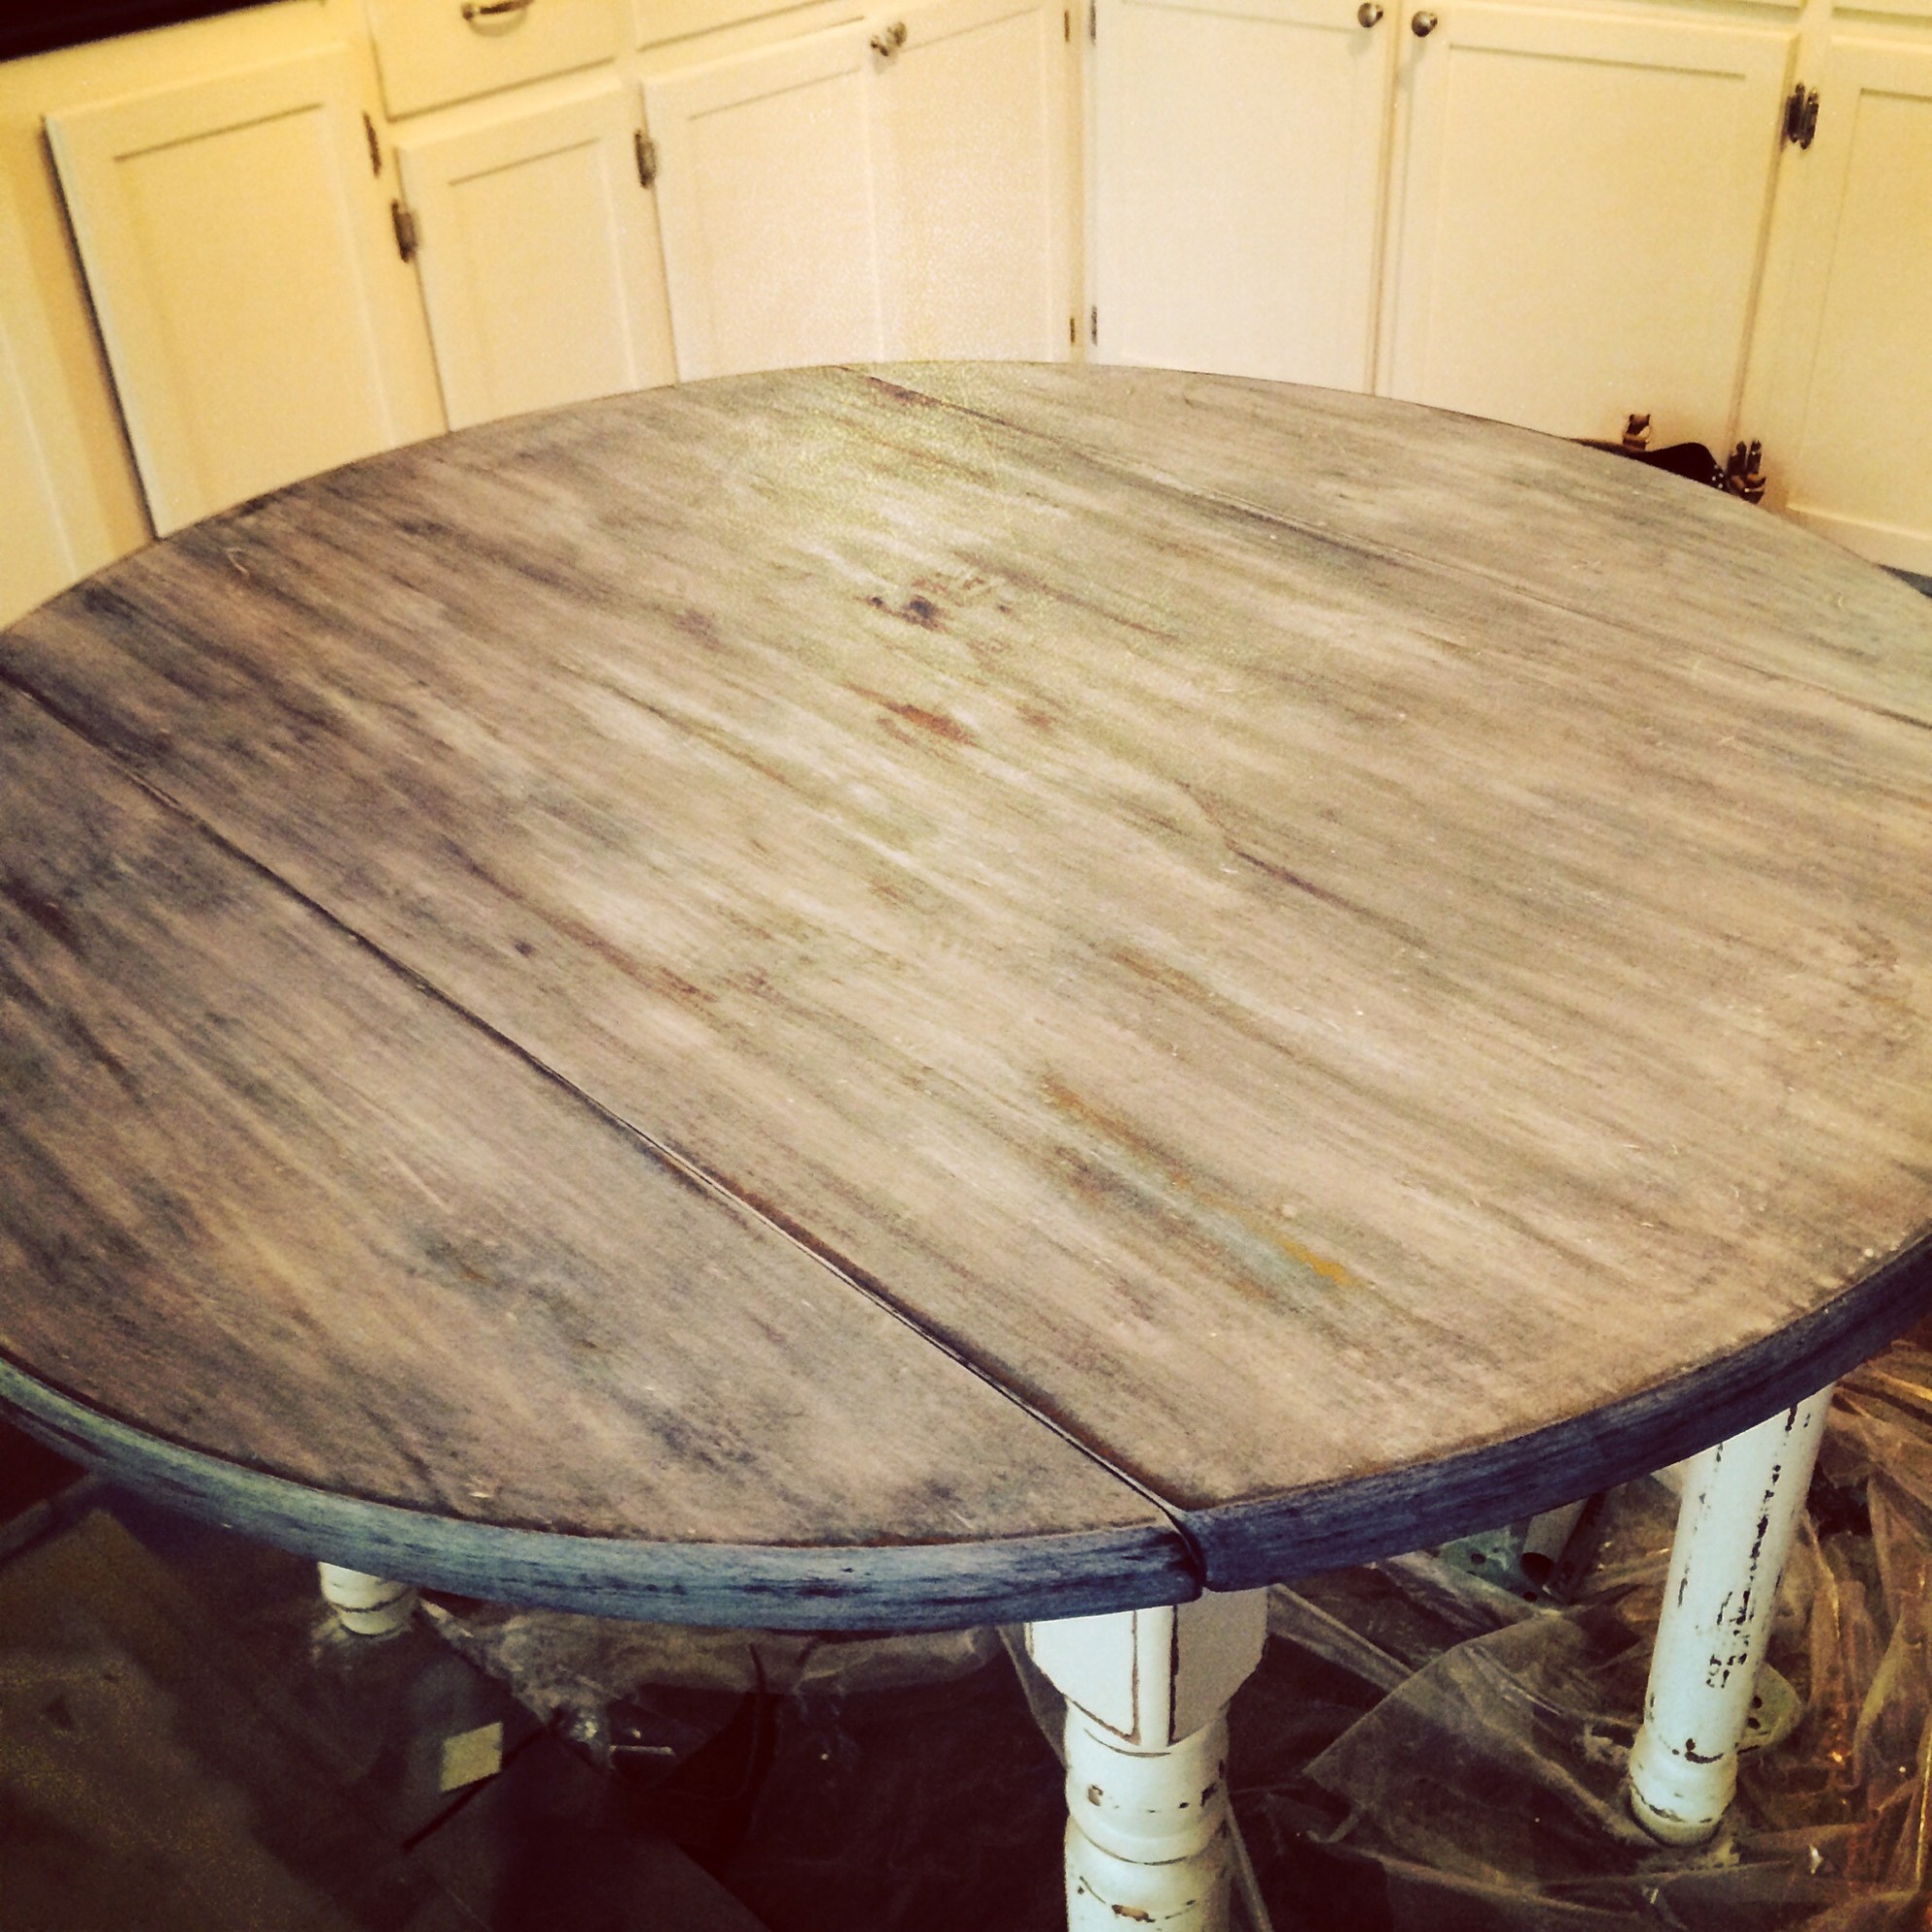 Shoe Polish | The Project Palace How To Use Chalk Paint On Wood Table